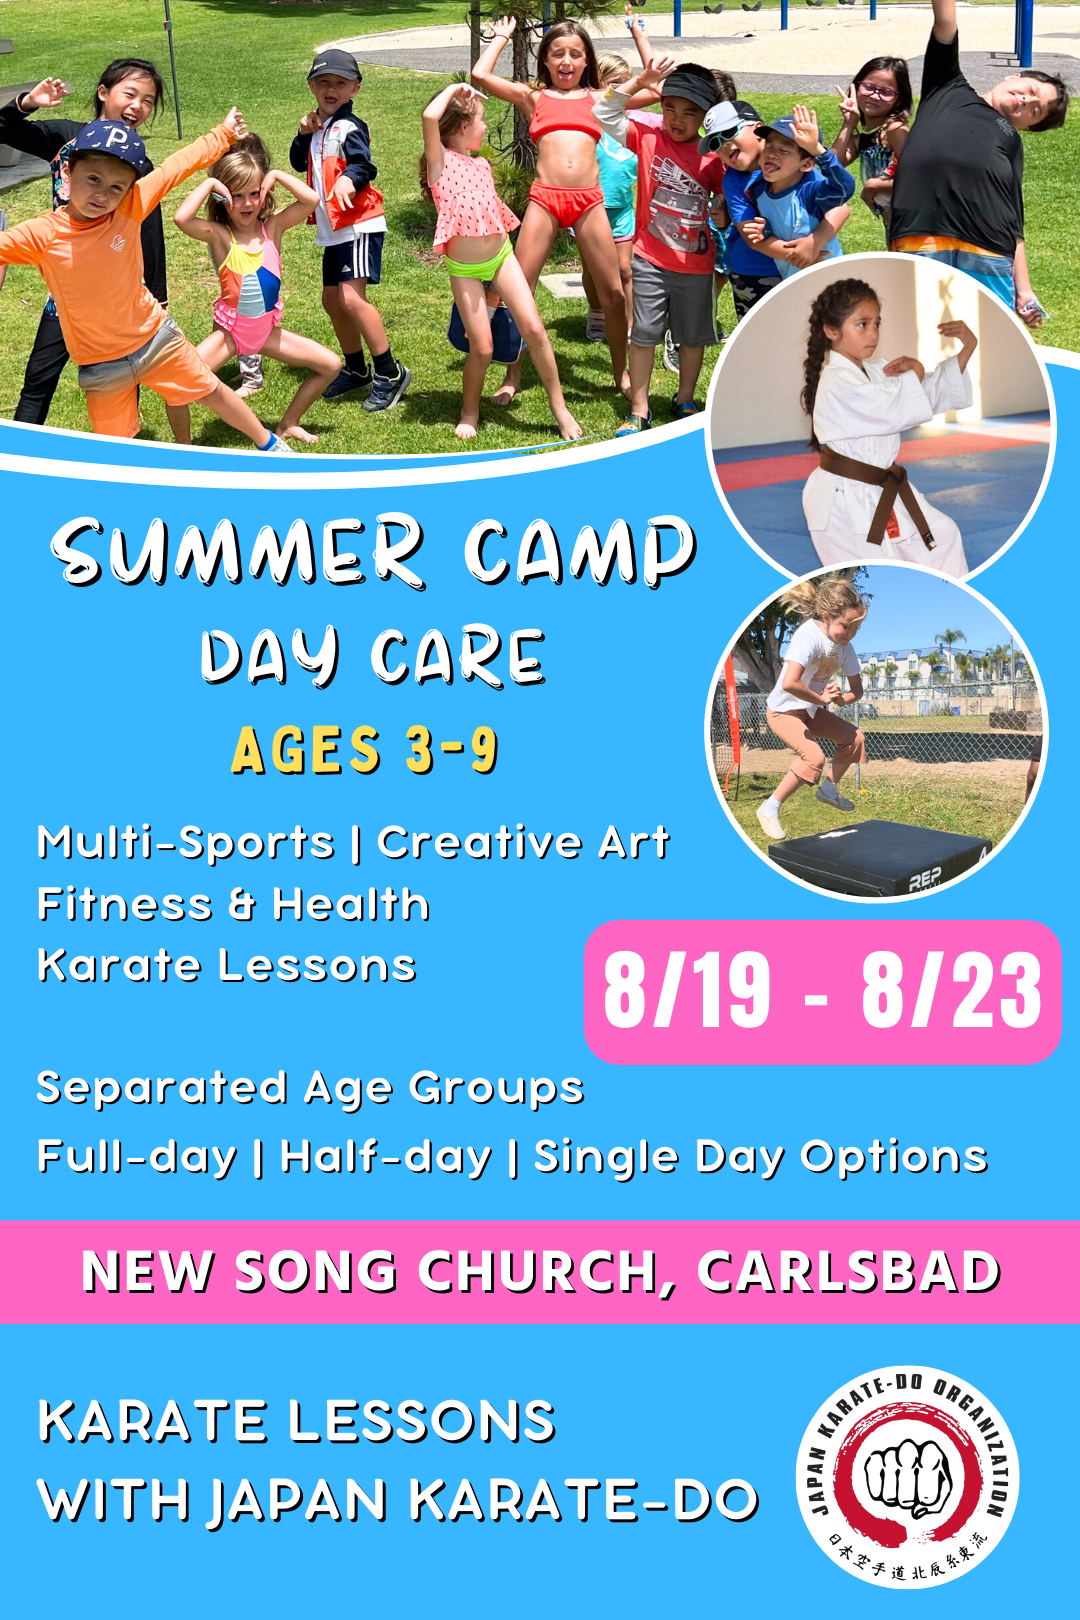 8/19 - 8/23 | Mon - Fri | 8:30 - 4:00<br>Multi-Sports, Art, and Karate<br>New Song Church, Carlsbad<br>Ages 3-9 | Separated Age Groups